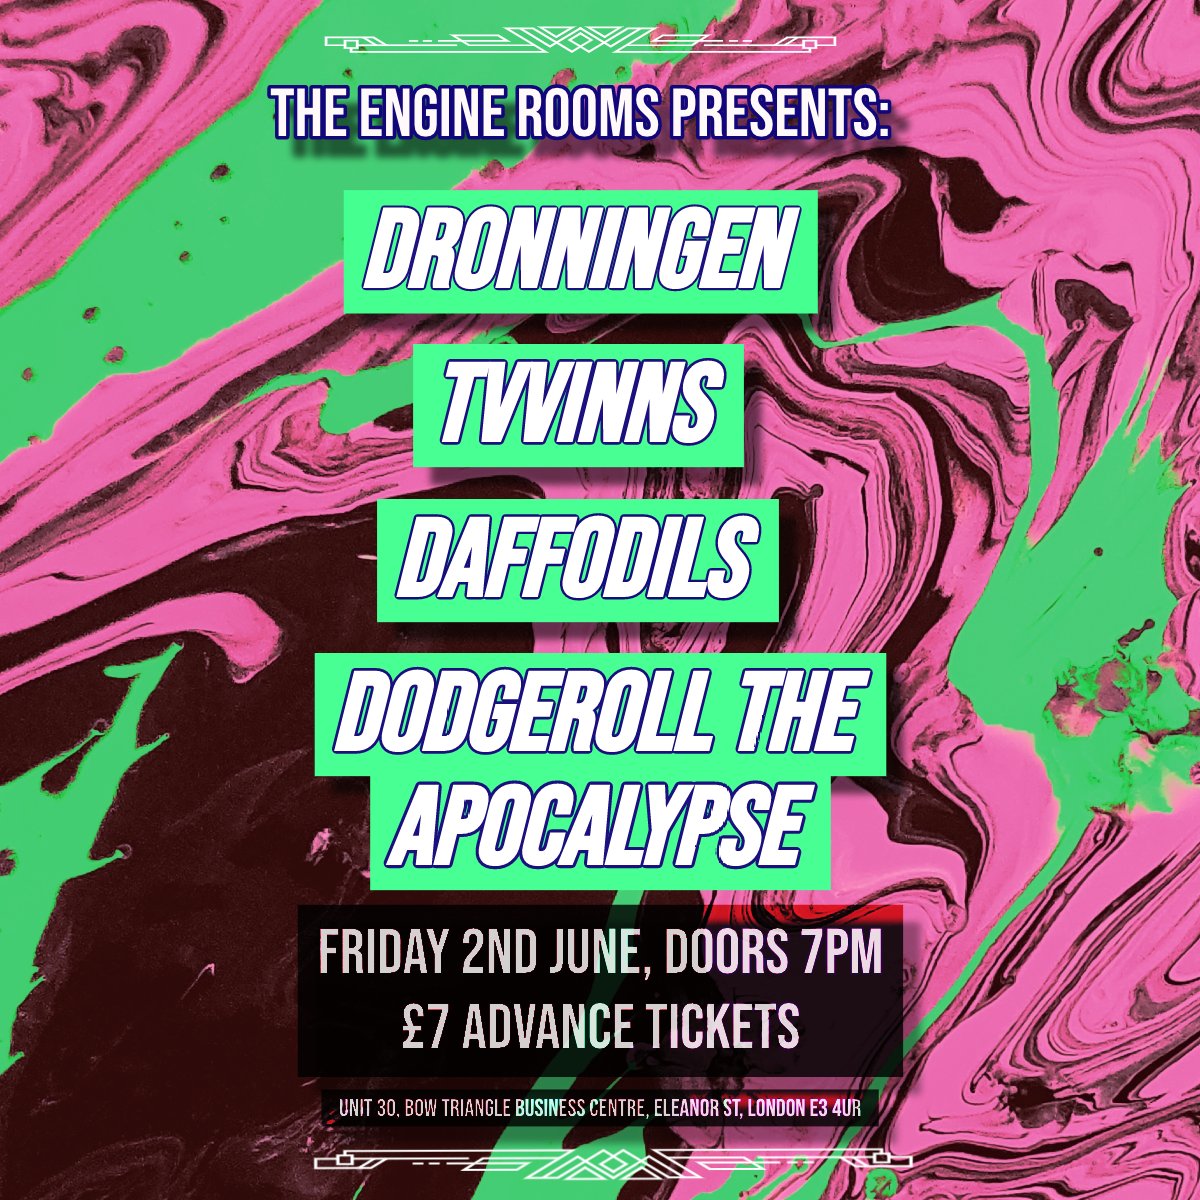 ⚡️NEXT GIG!⚡️ Hello Everyone, we are very excited to announce our next gig on FRIDAY 2ND JUNE at @EngineRoomsE3 (London) with the amazing @TVVINNS, Daffodils and Dodgeroll the Apocalypse! Make sure to get your advance tickets below: fatso.ma/XQqr See you there! X